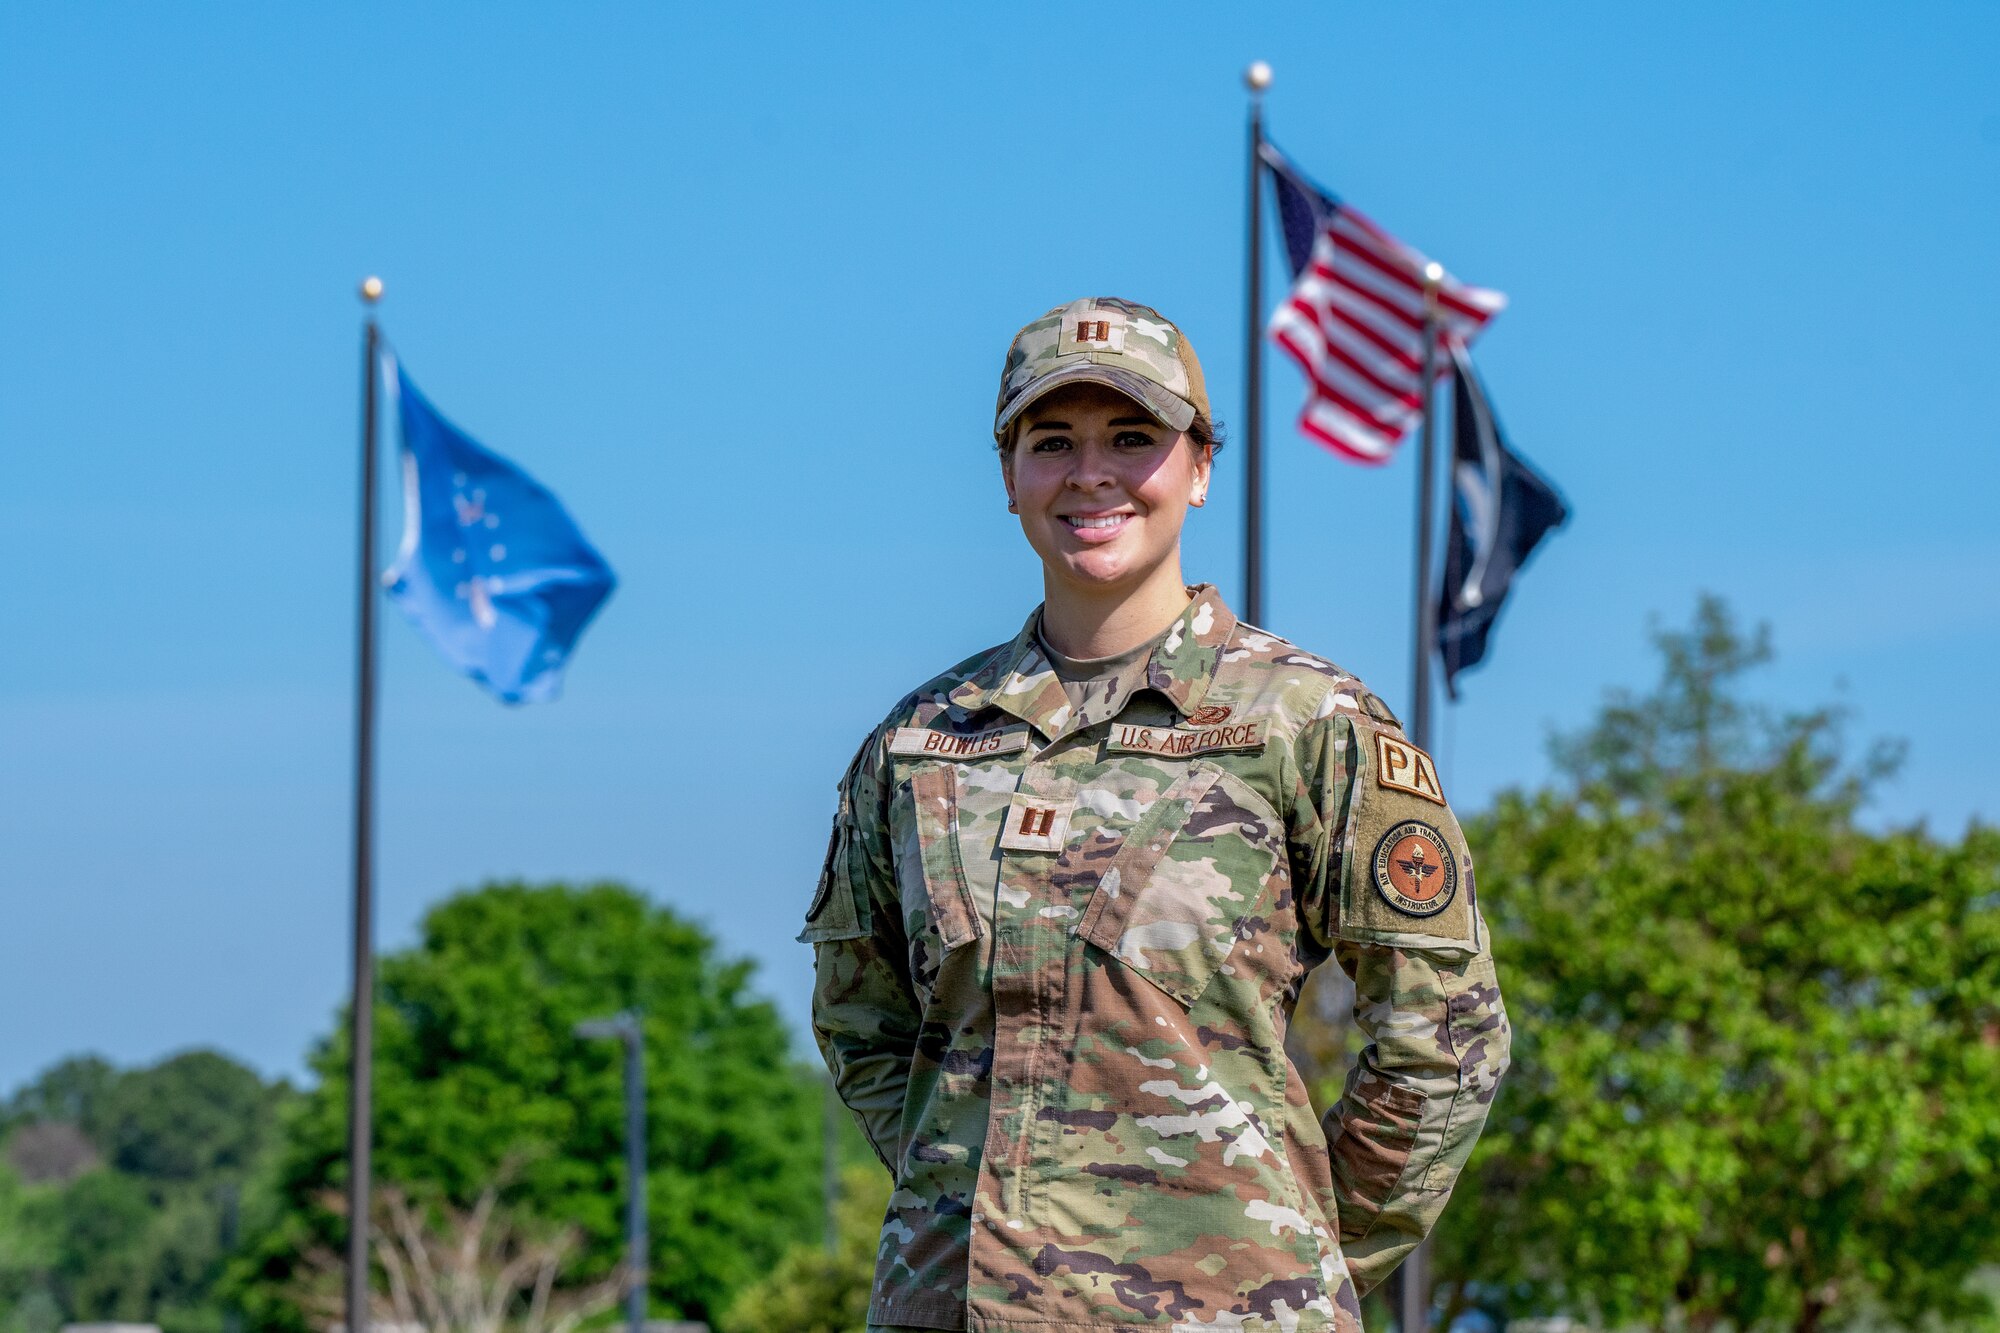 Capt. Abigail Bowles stands in her OCP uniform in front of flag poles and tress, smiling at parade rest.